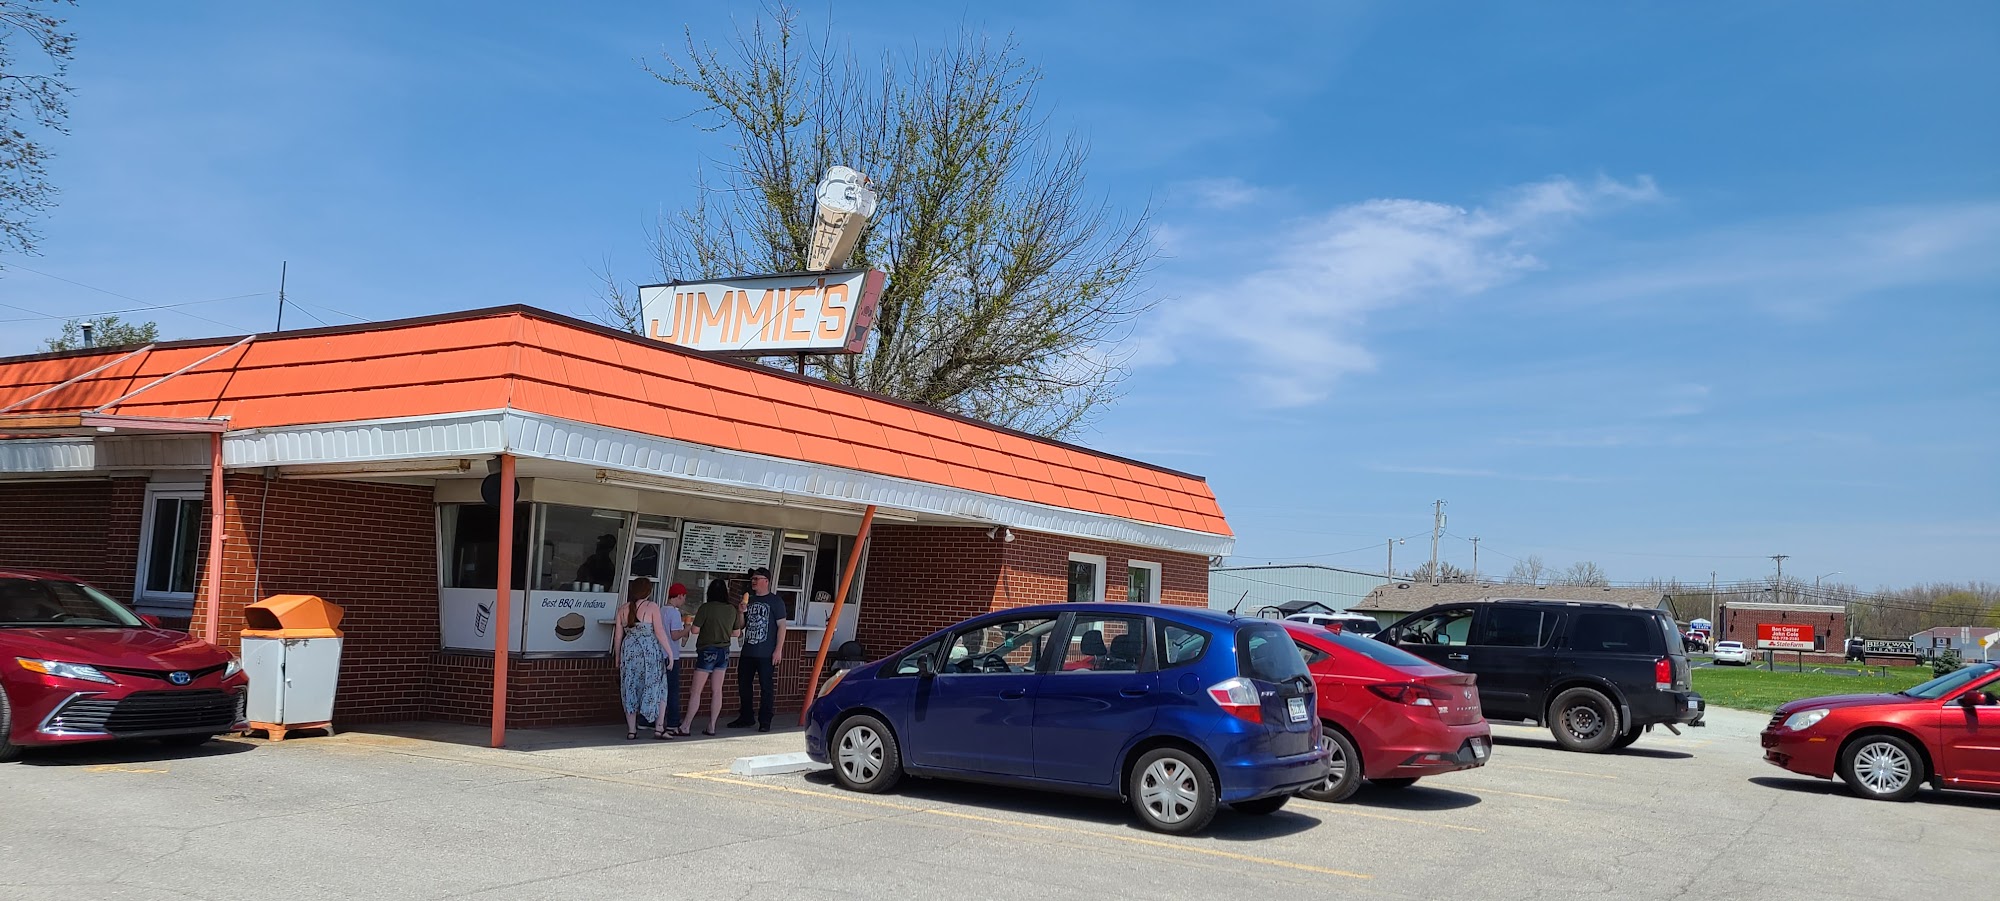 Jimmie's Dairy Bar